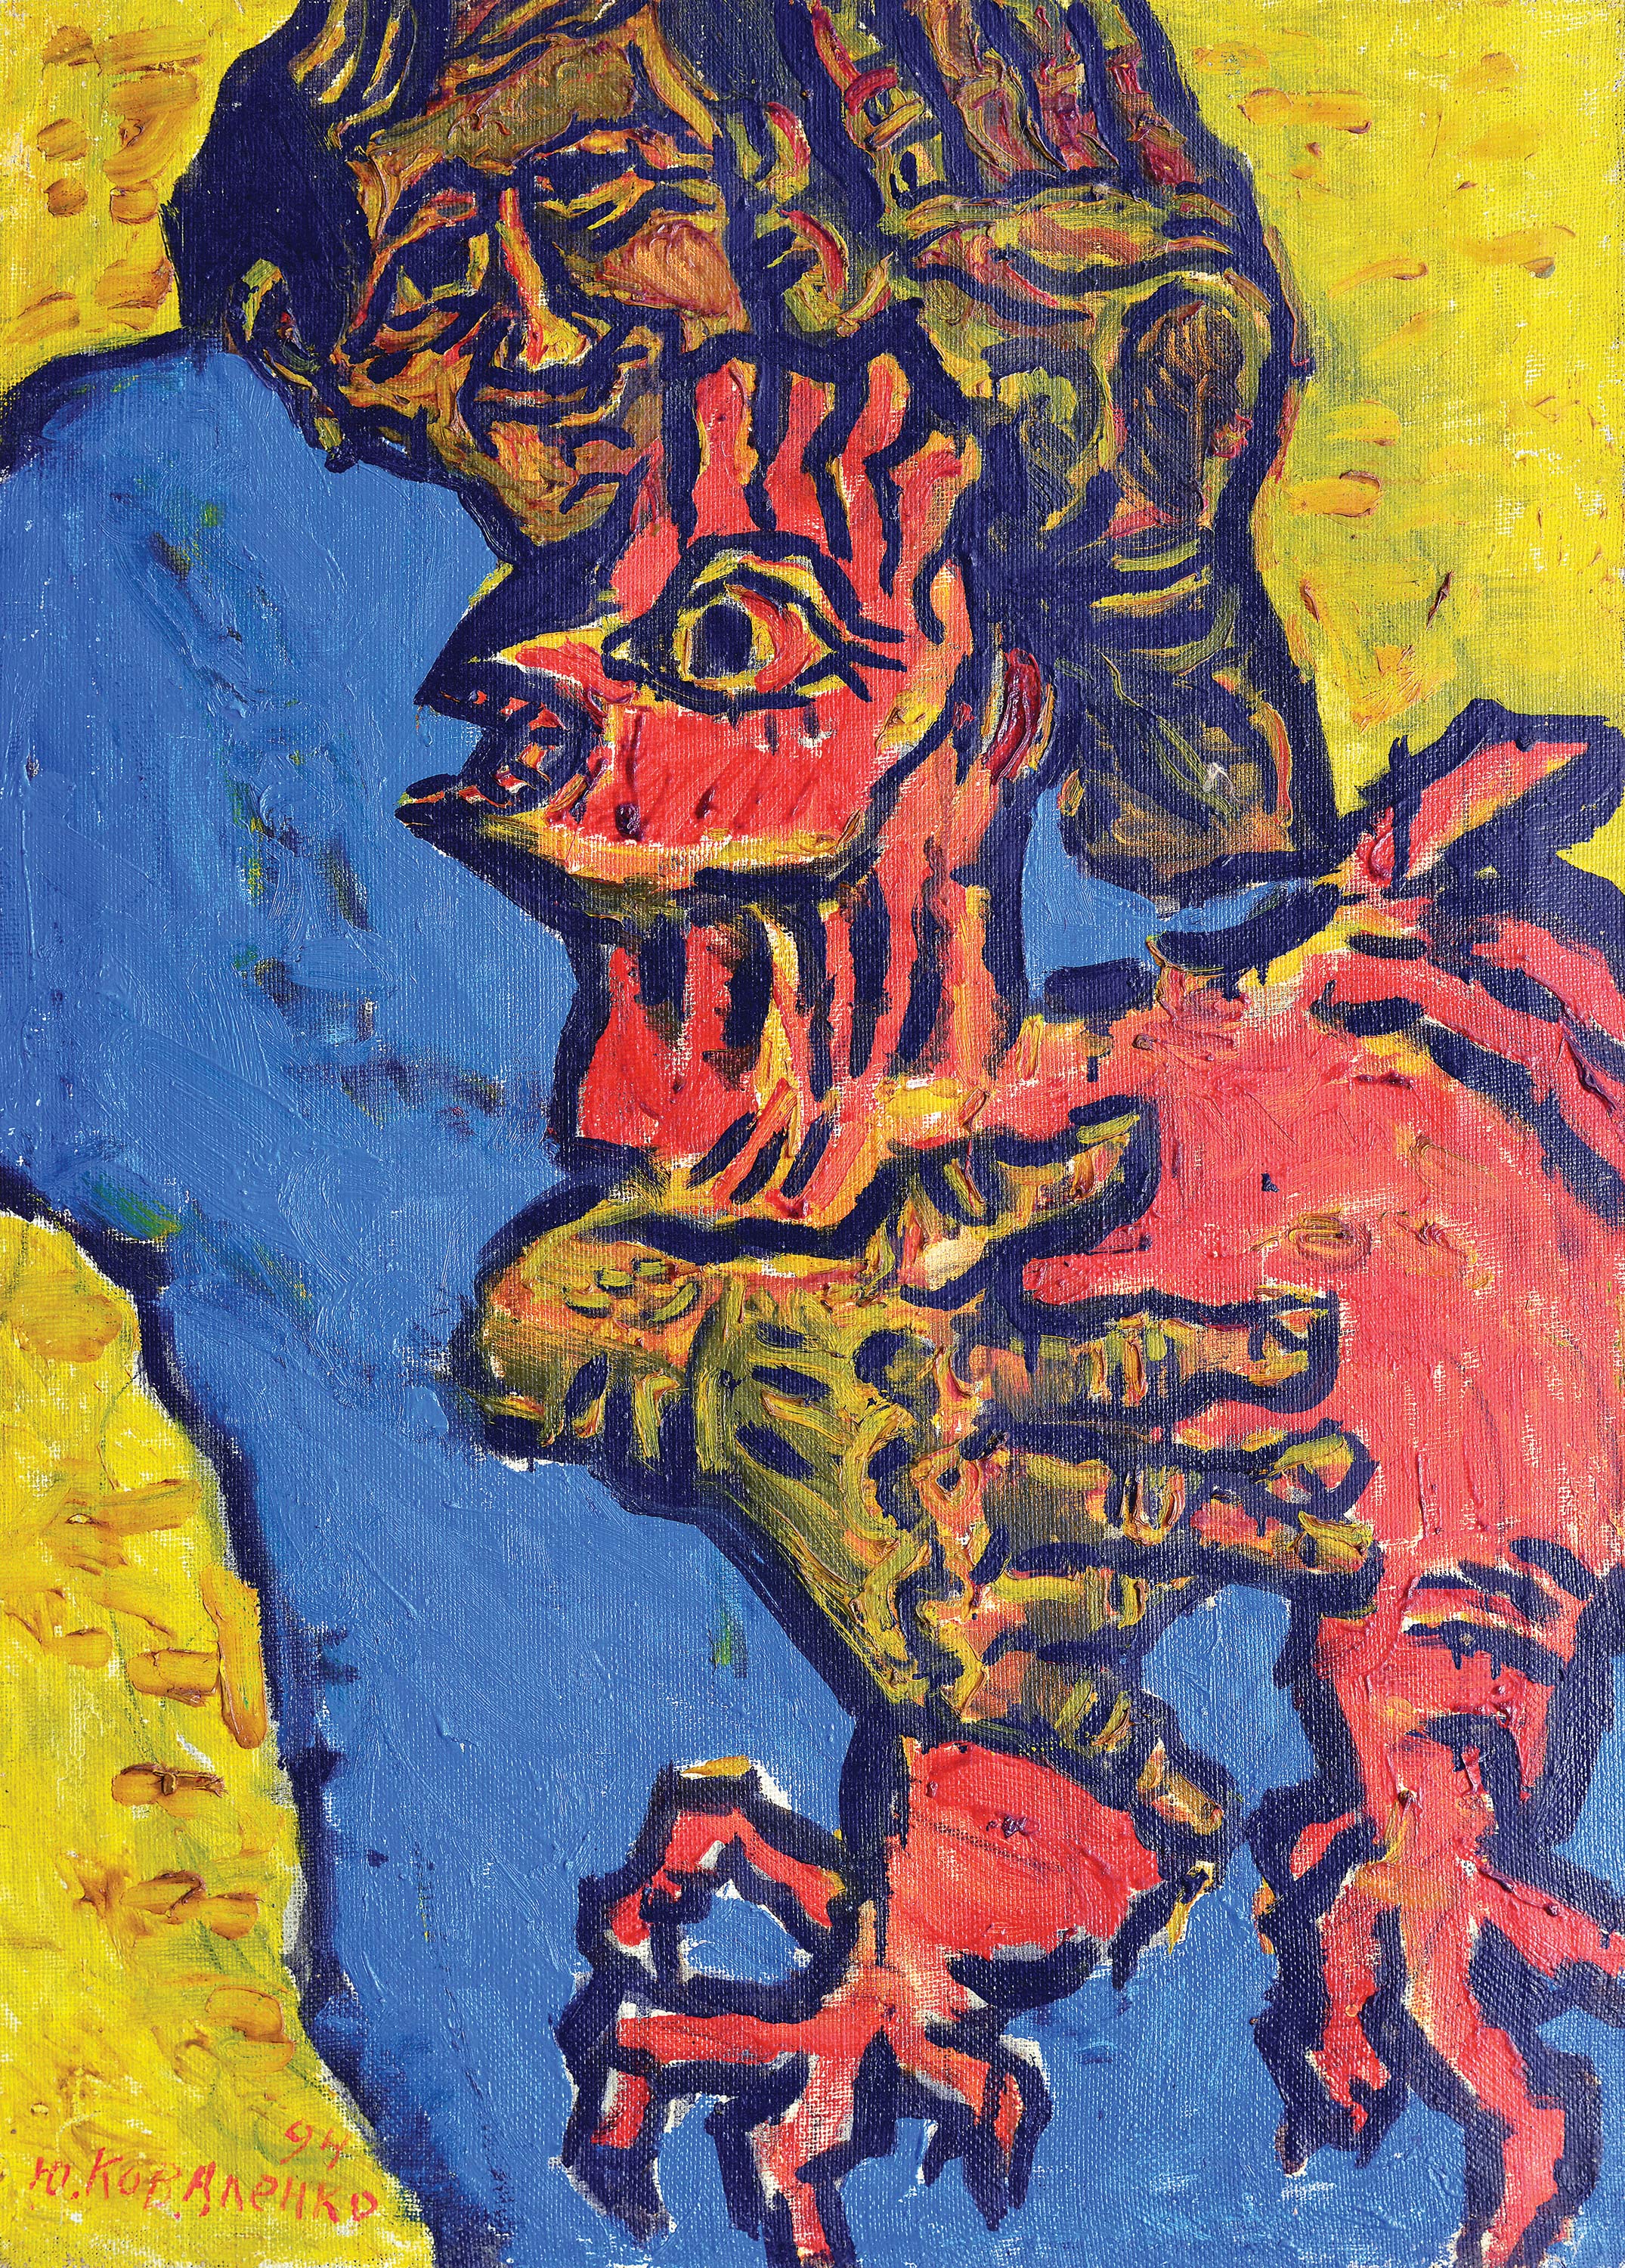 "Portrait with a cock", 1994